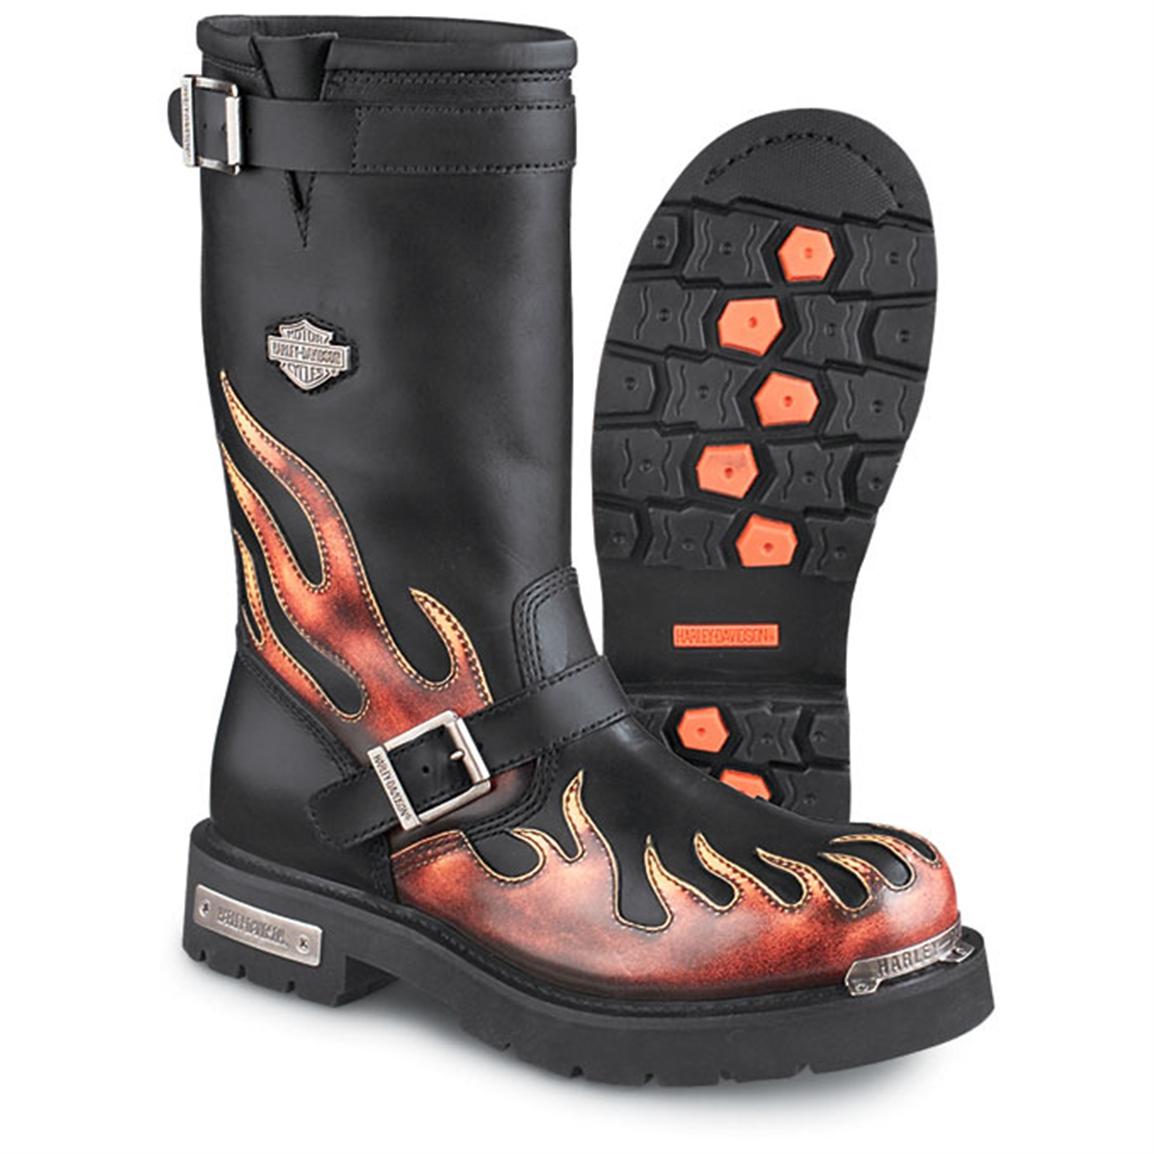 Men S Harley Davidson Fireside Boots Black Red 87014 Casual Shoes At Sportsman S Guide